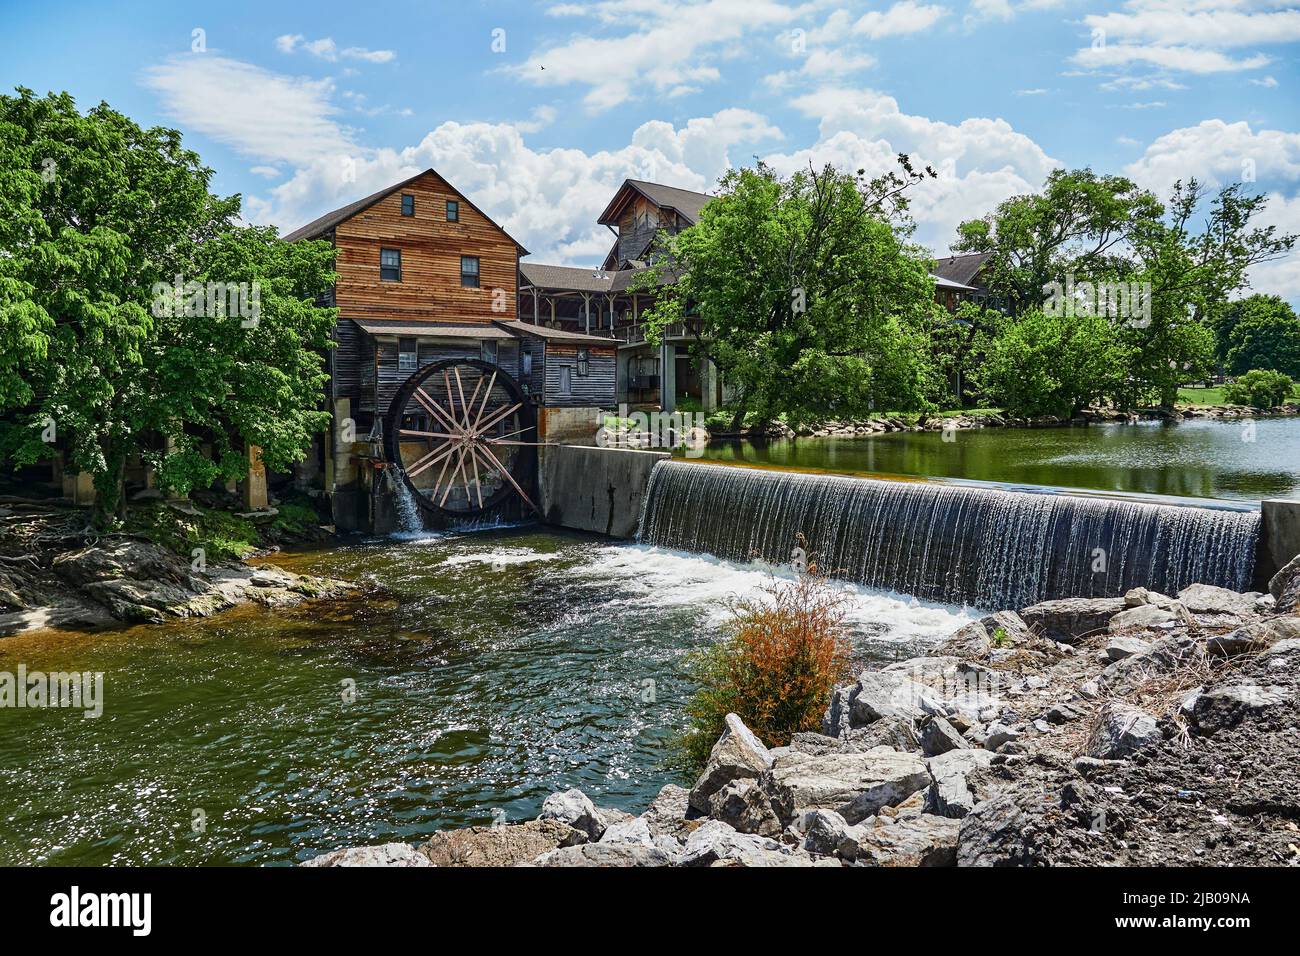 Alte historische rustikale Mühle am West Prong Little Pigeon River, Pigeon Forge Tennessee, USA. Stockfoto